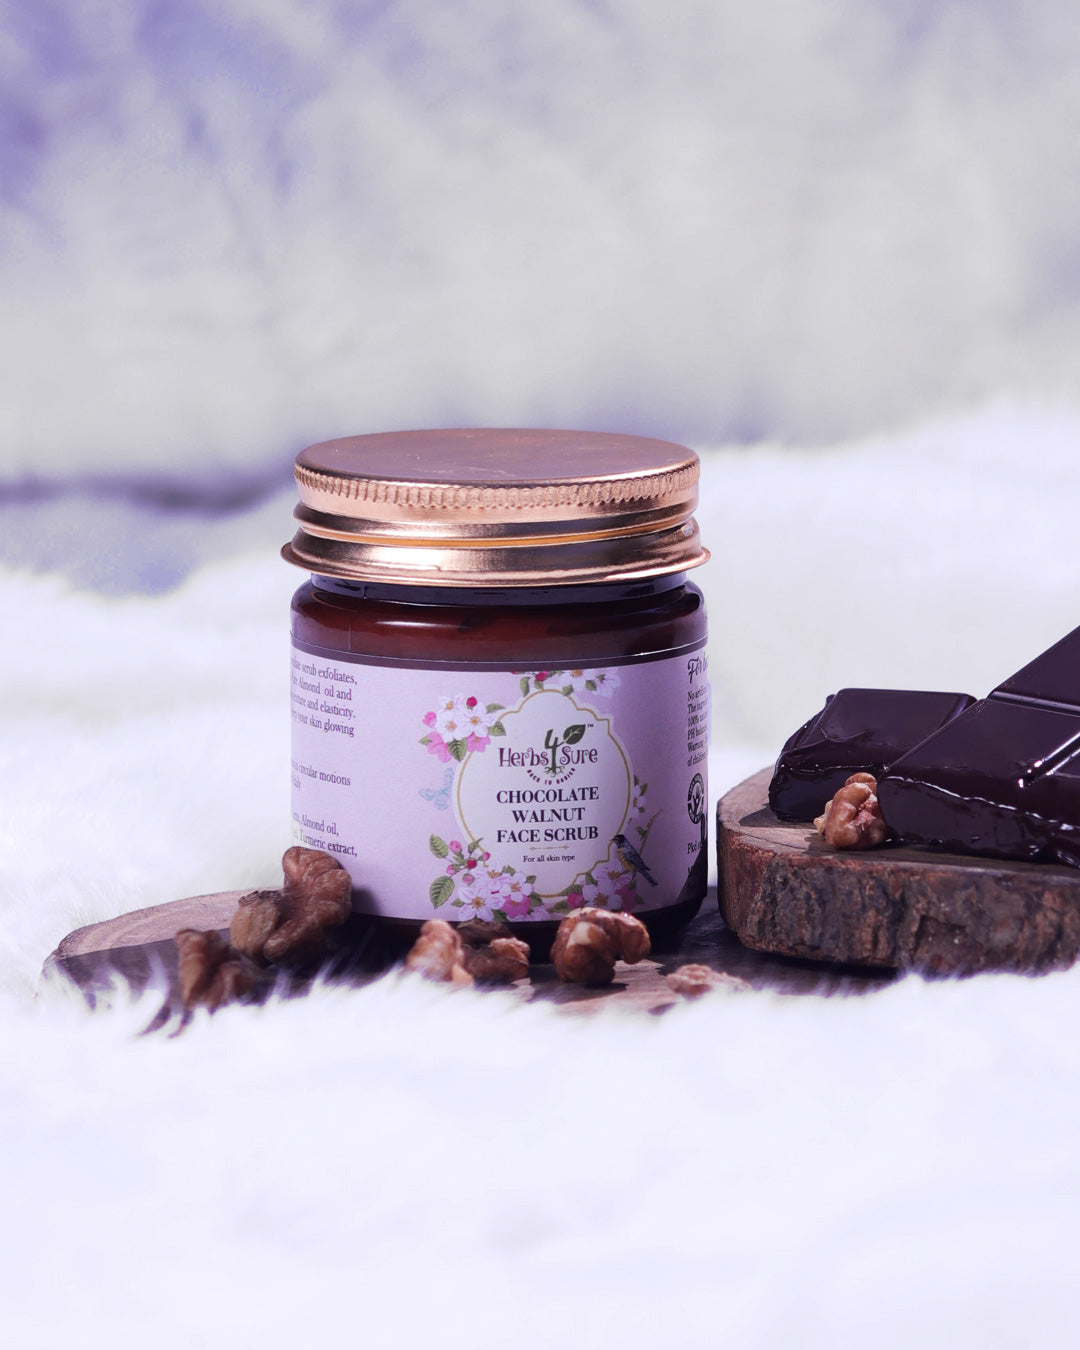 CHOCOLATE WALNUT FACE SCRUB- FOR LIGHT EXFOLIATION- SUITABLE FOR DULL DRY LIFELESS UNEVEN SKIN